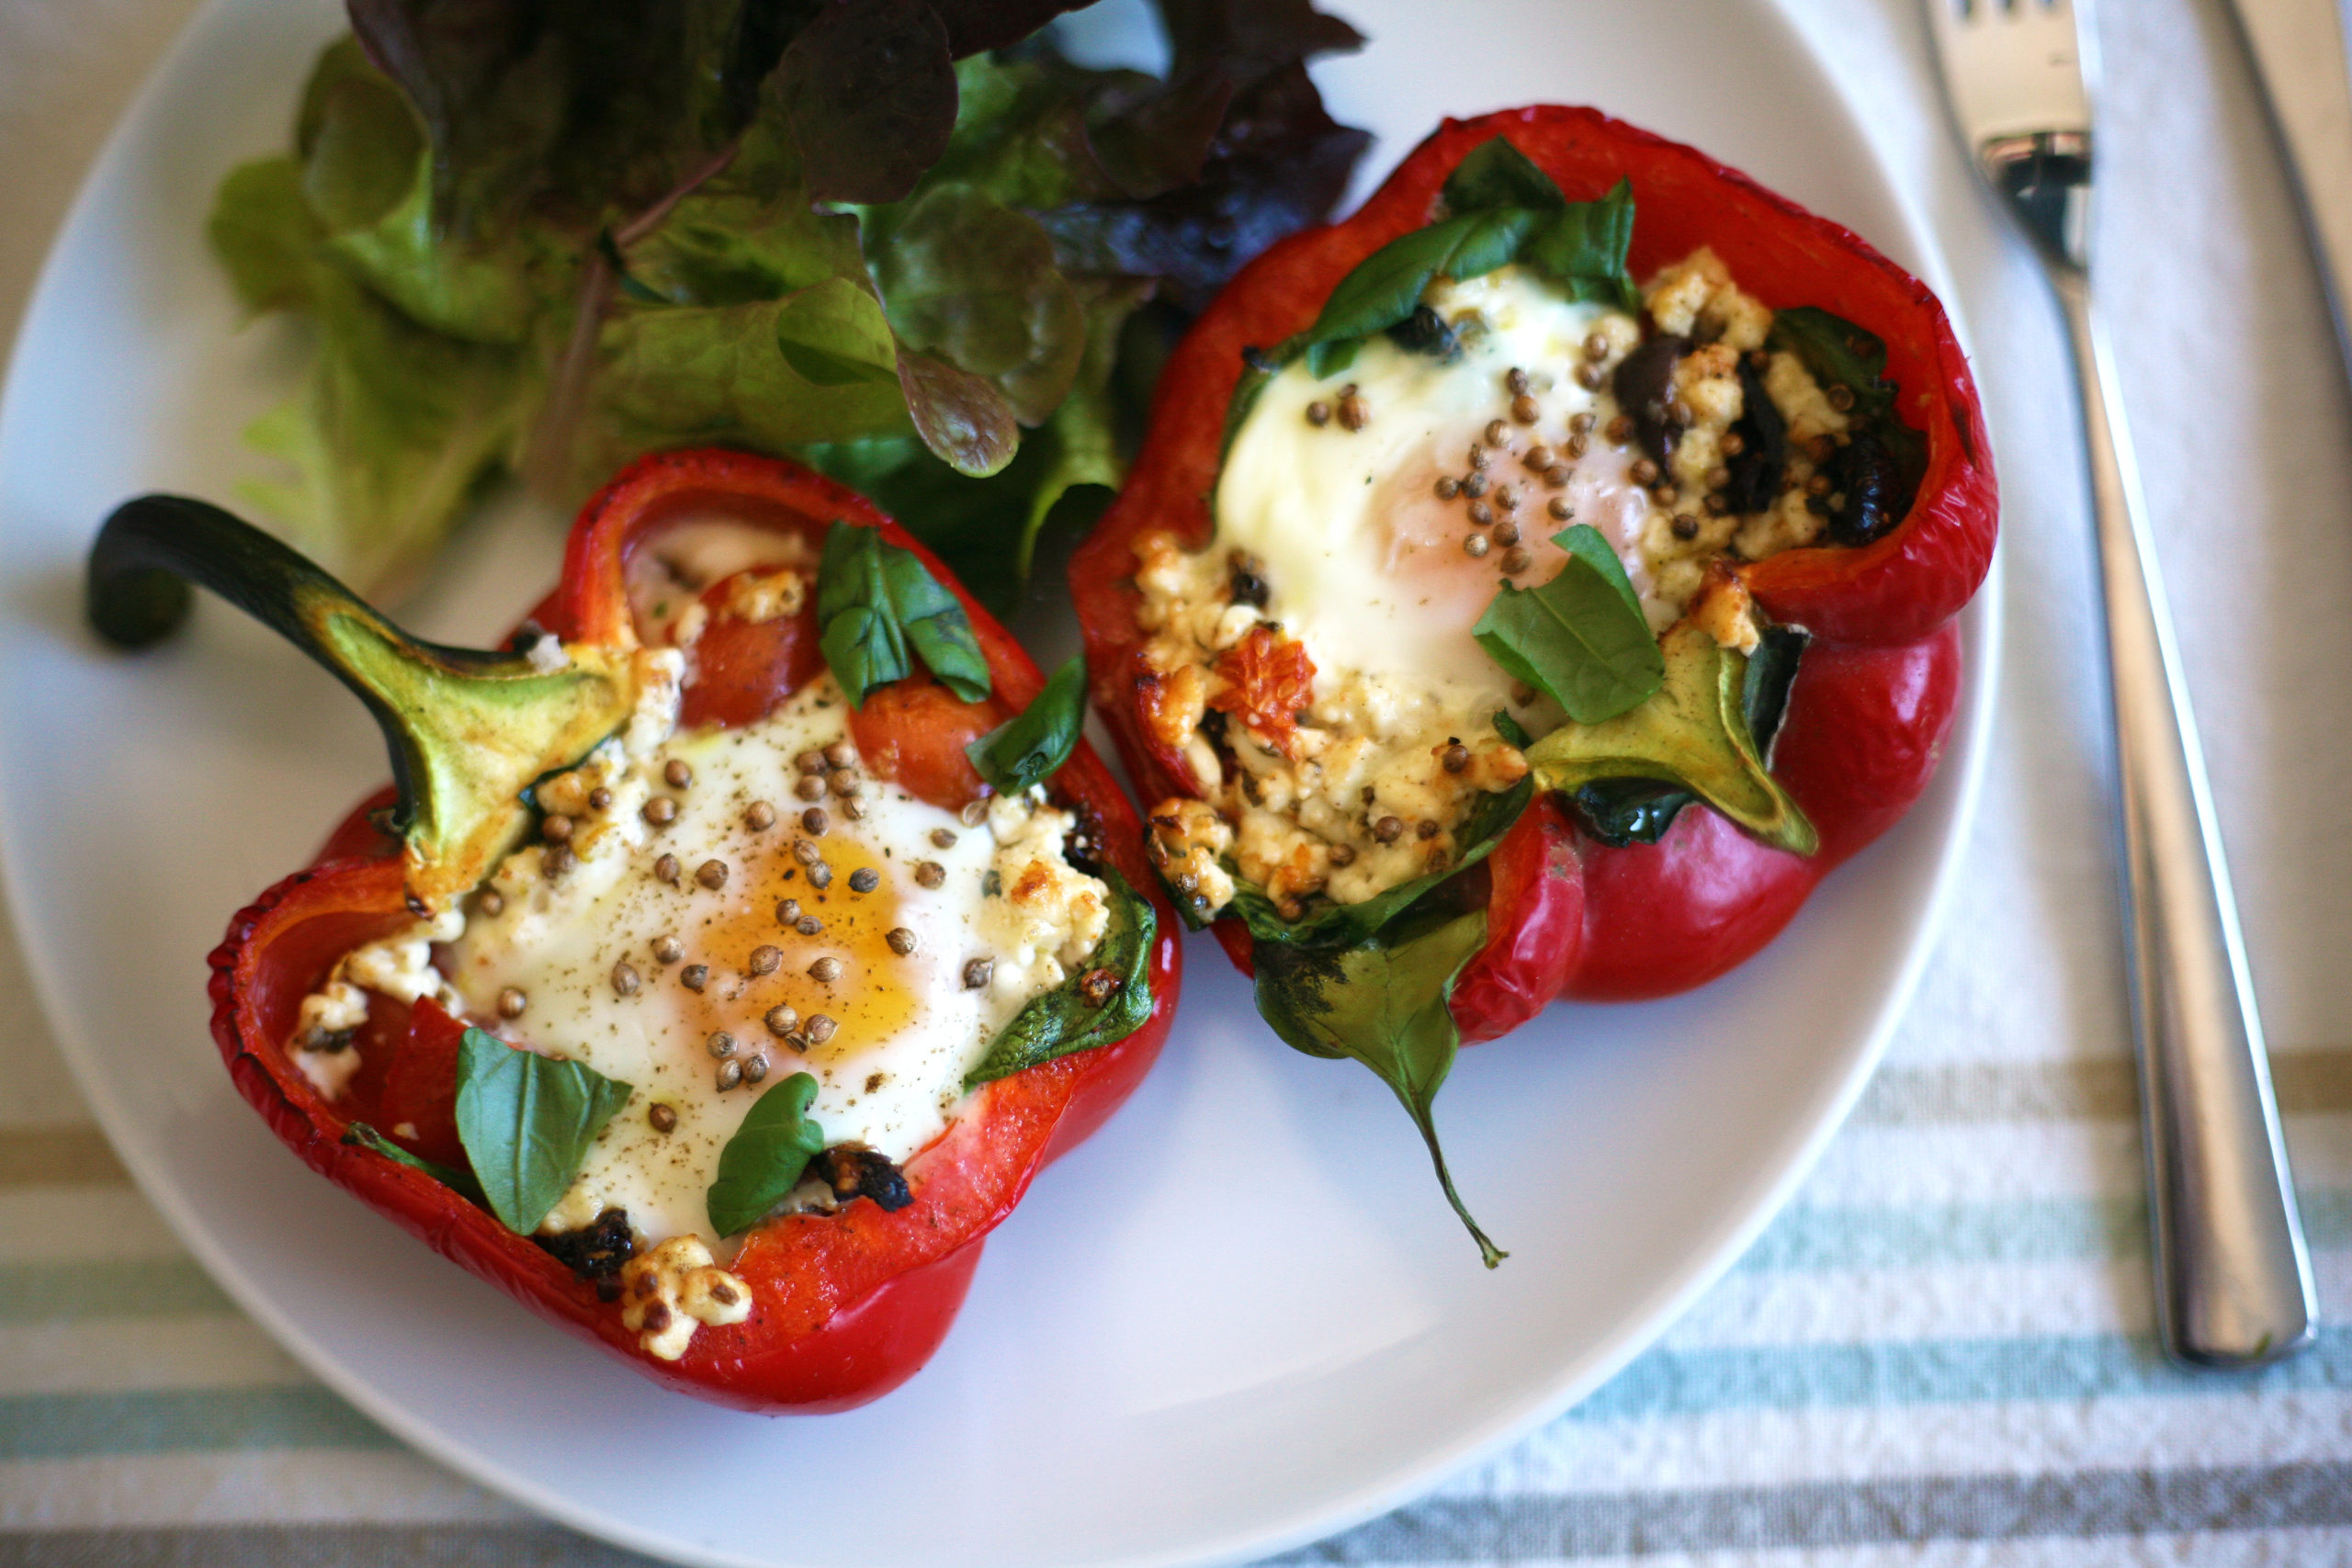 Baked eggs in roasted peppers